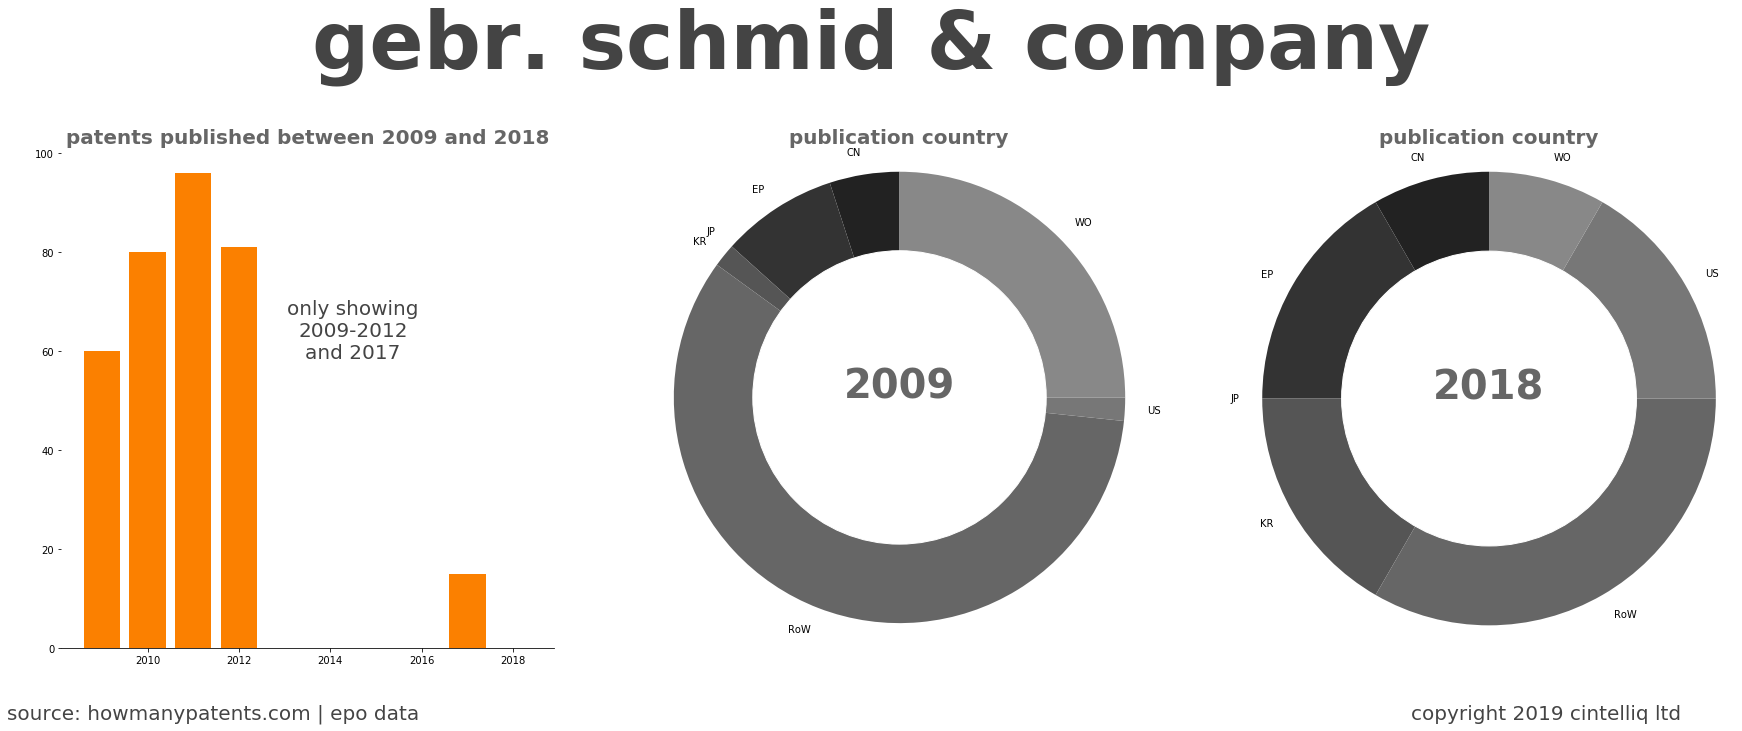 summary of patents for Gebr. Schmid & Company